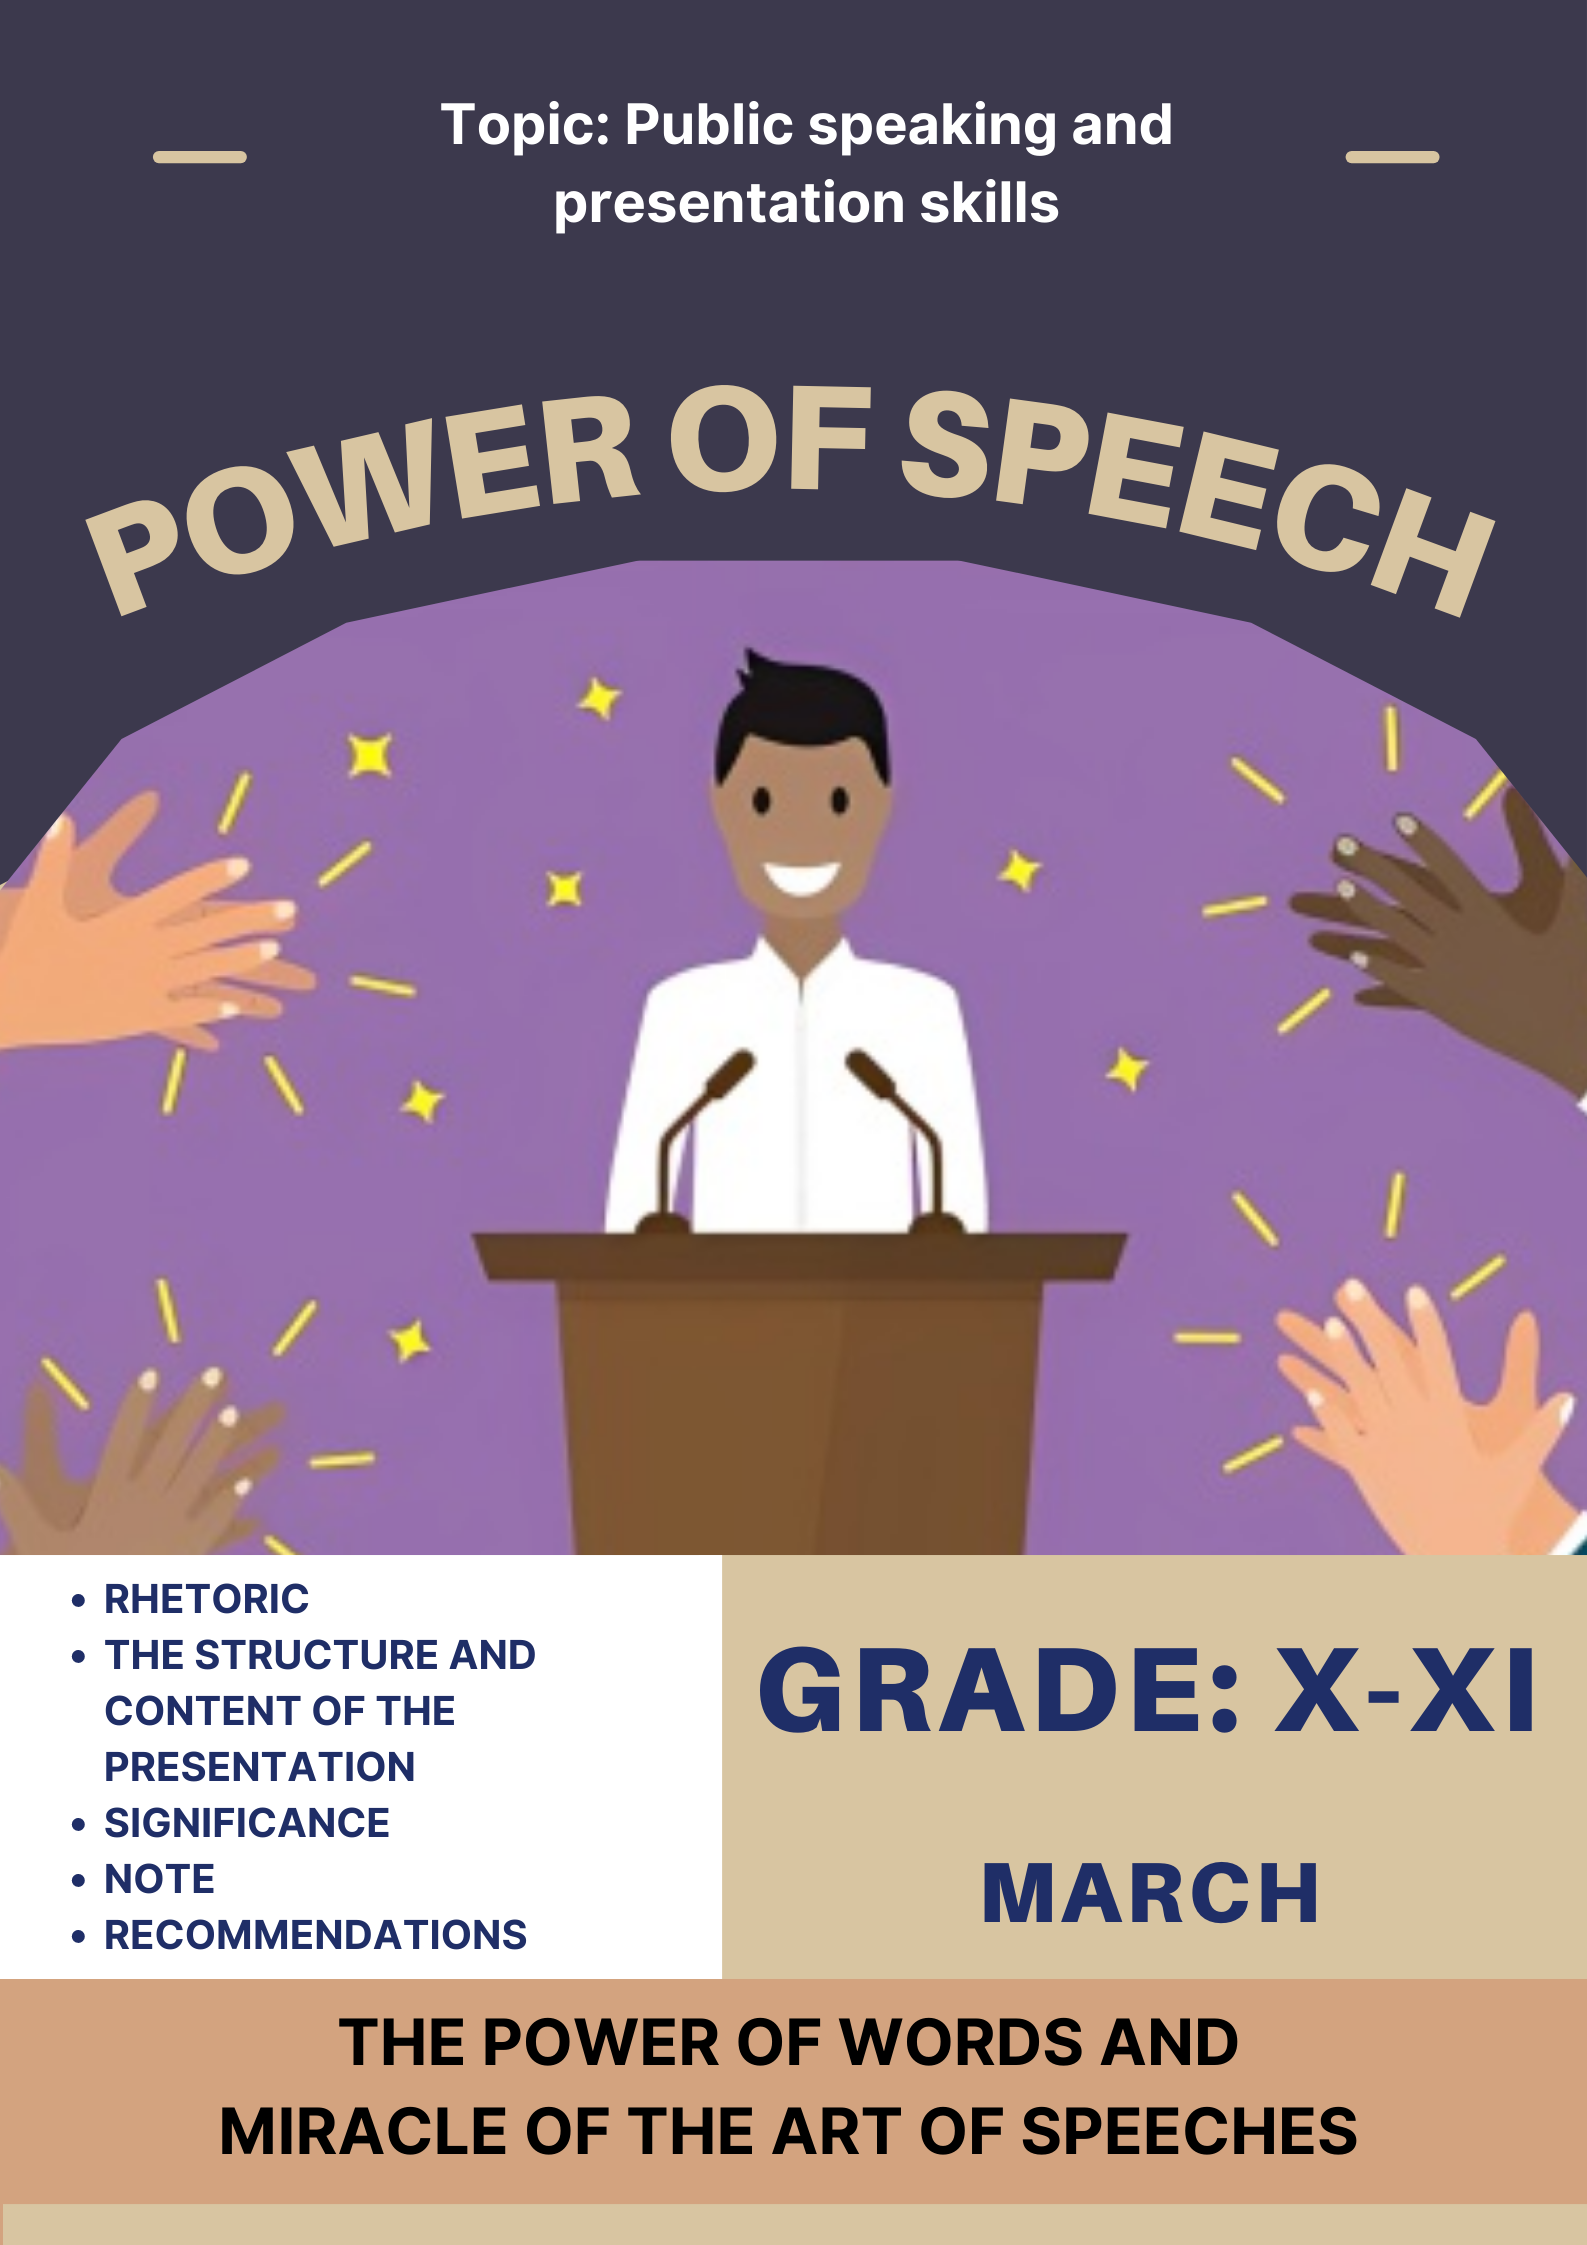 March: Public speaking and presentation skills